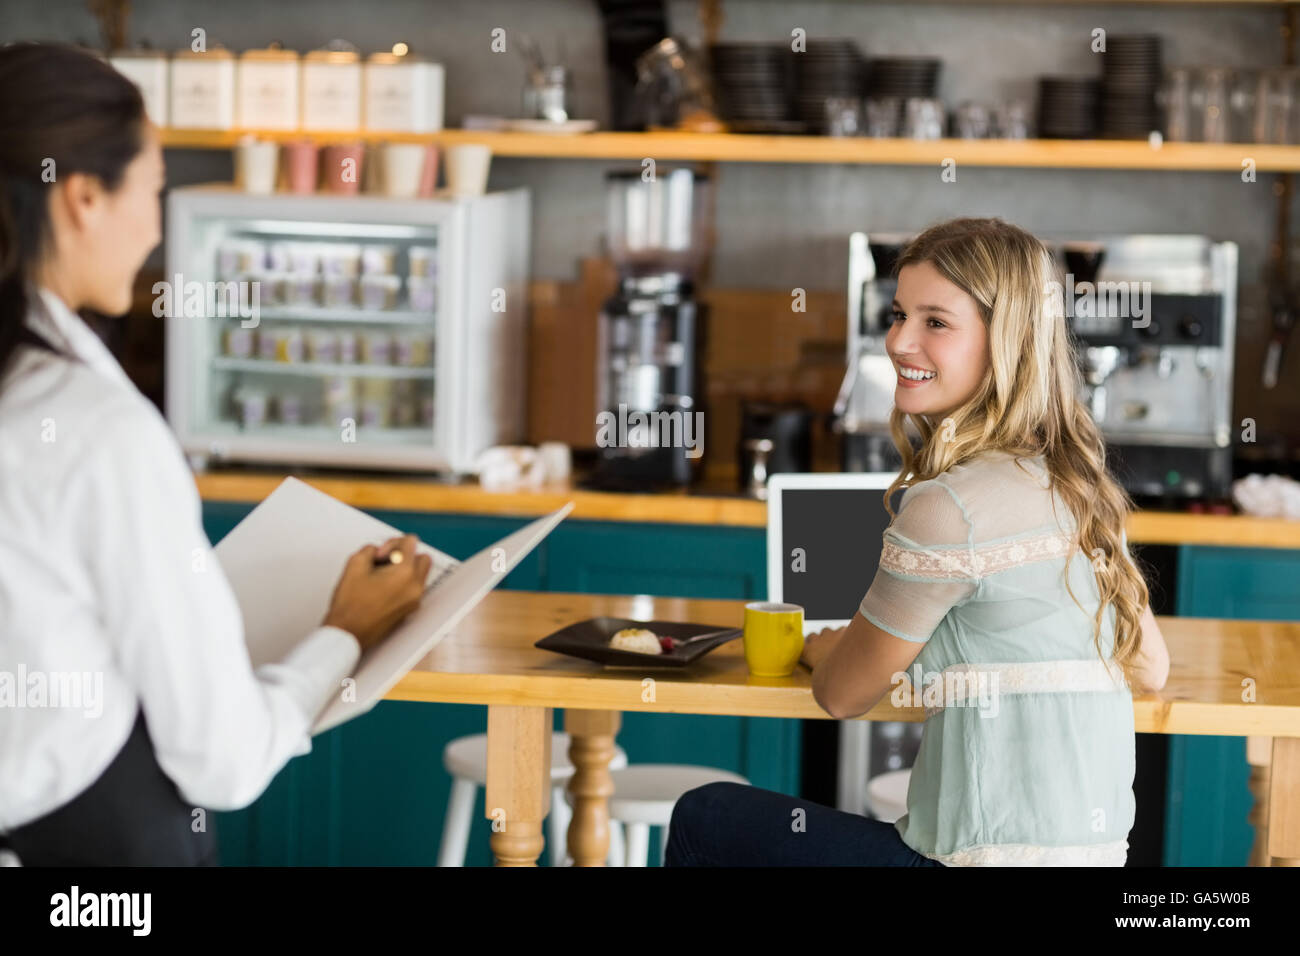 Woman ordering coffee from waitress Stock Photo